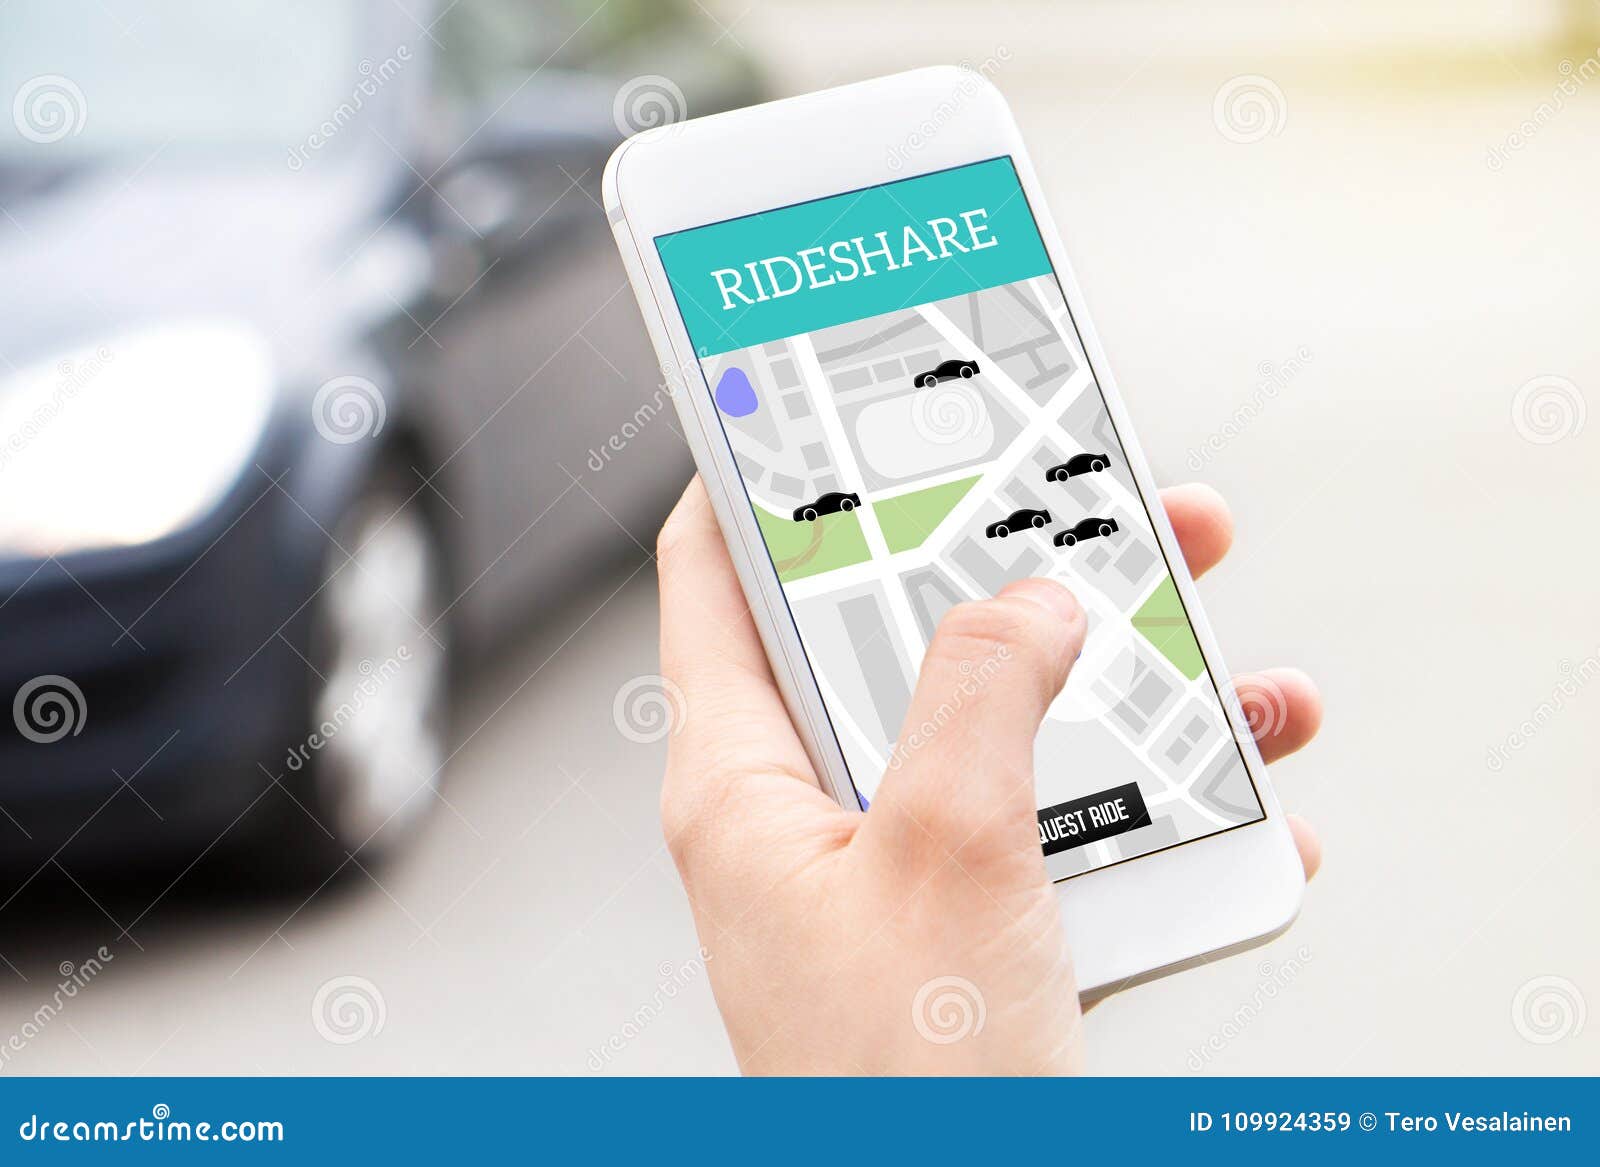 ride share taxi service on smartphone screen.